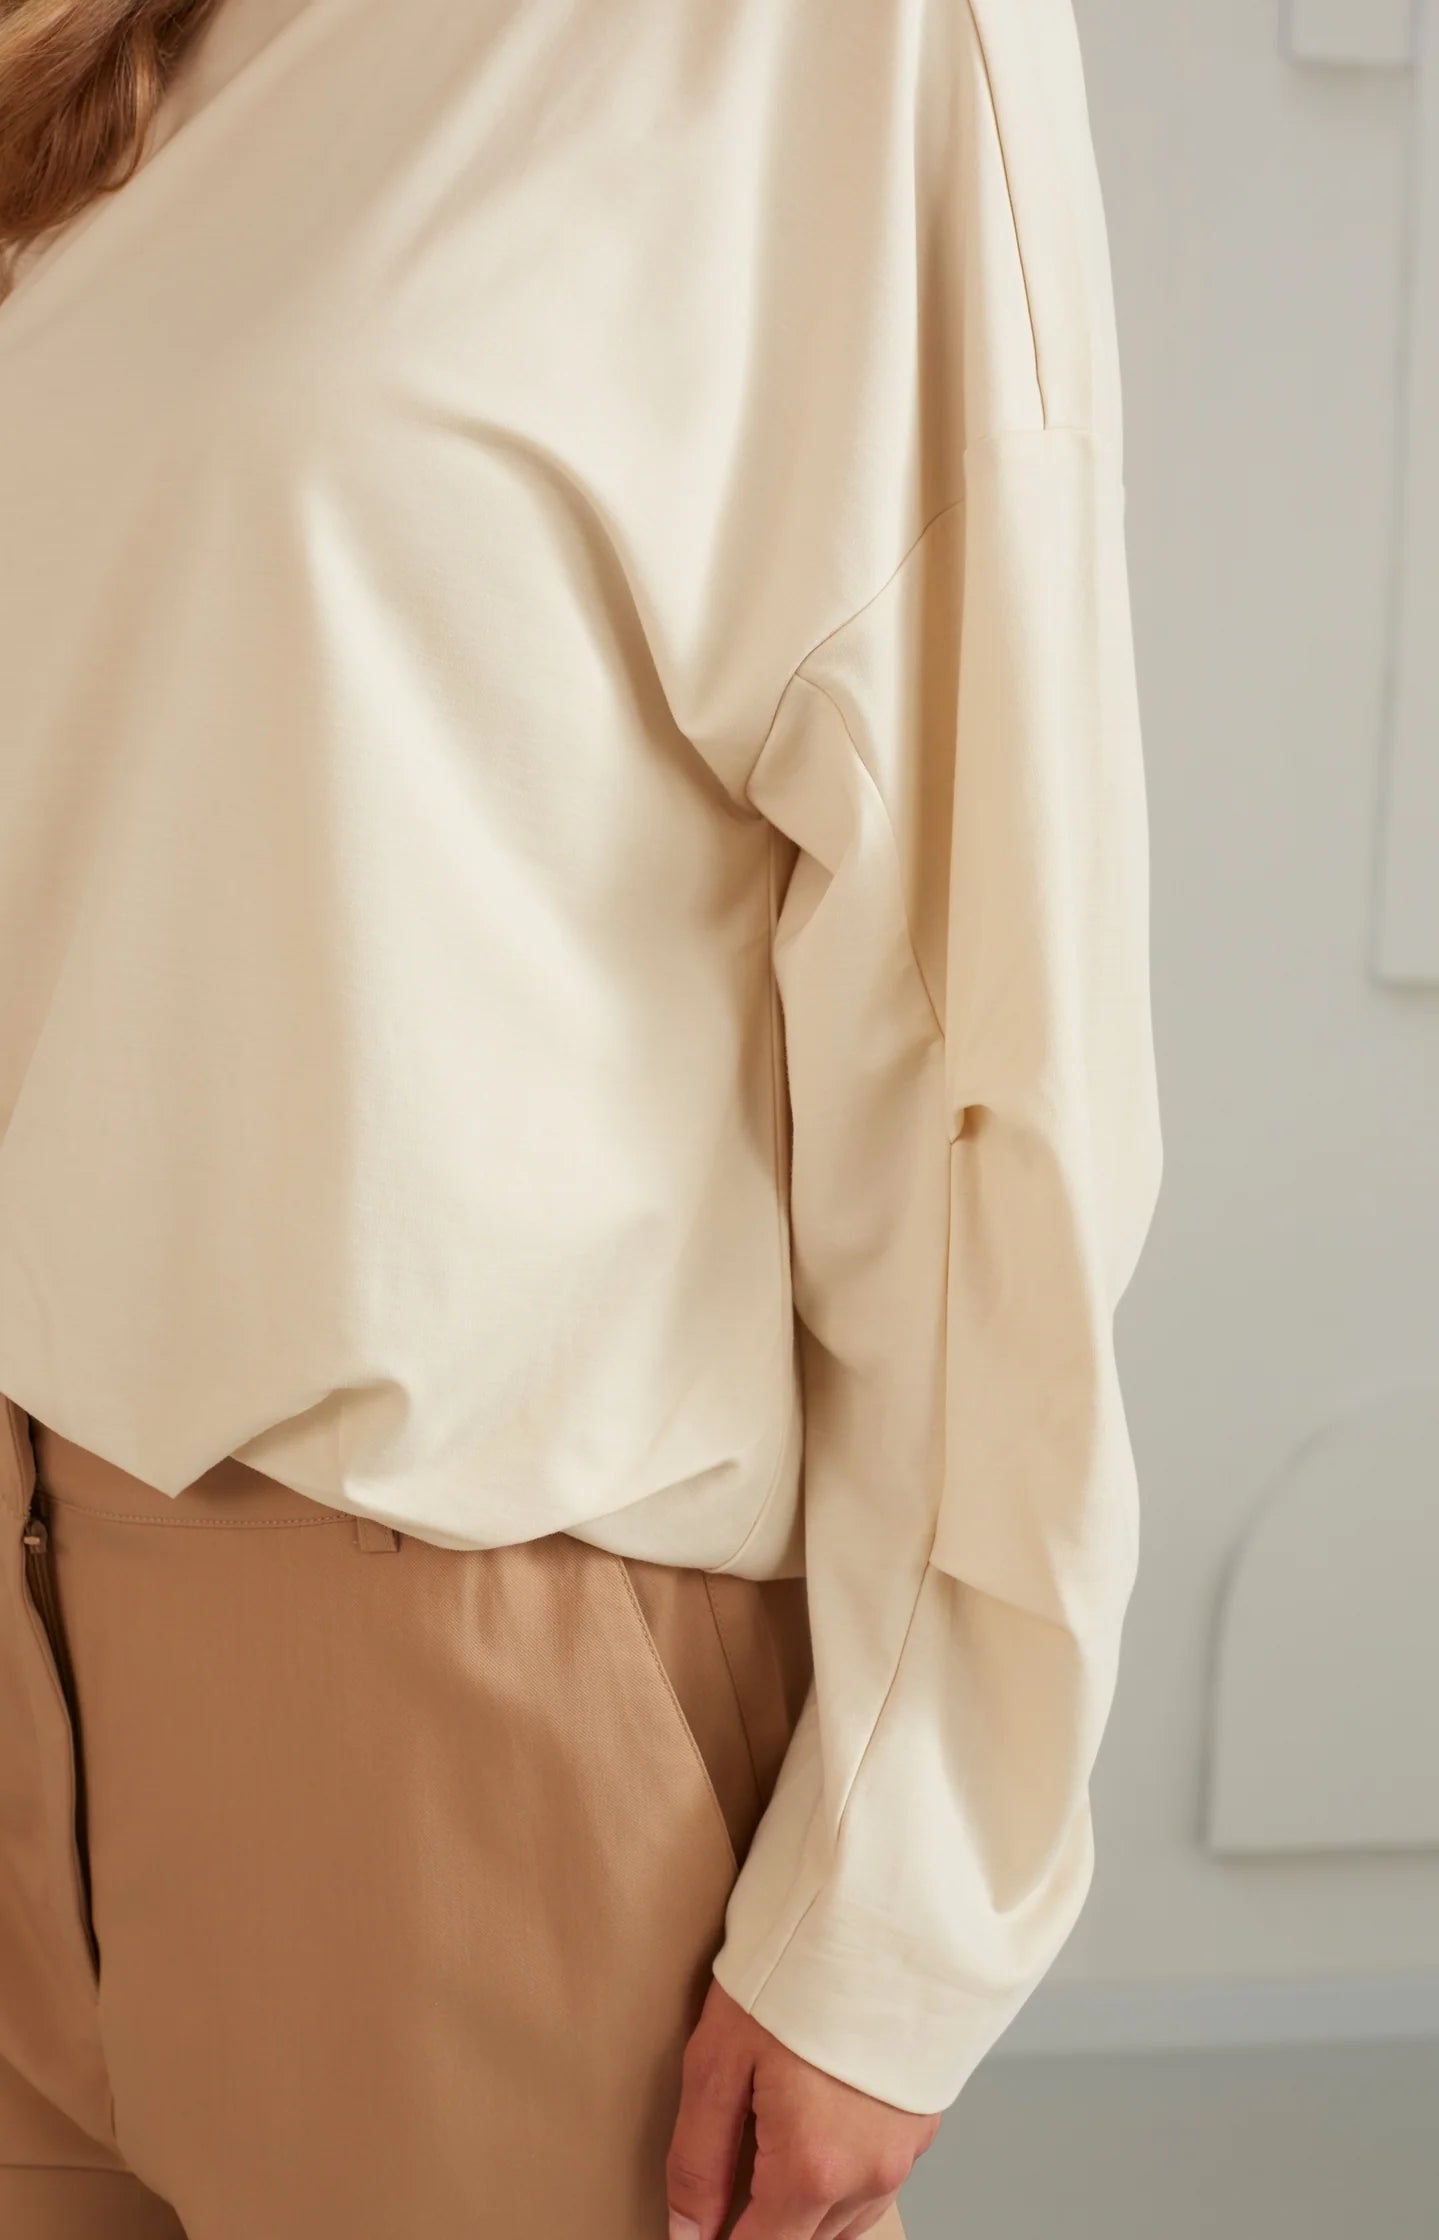 Sweater with Pleated Details in Summer Sand